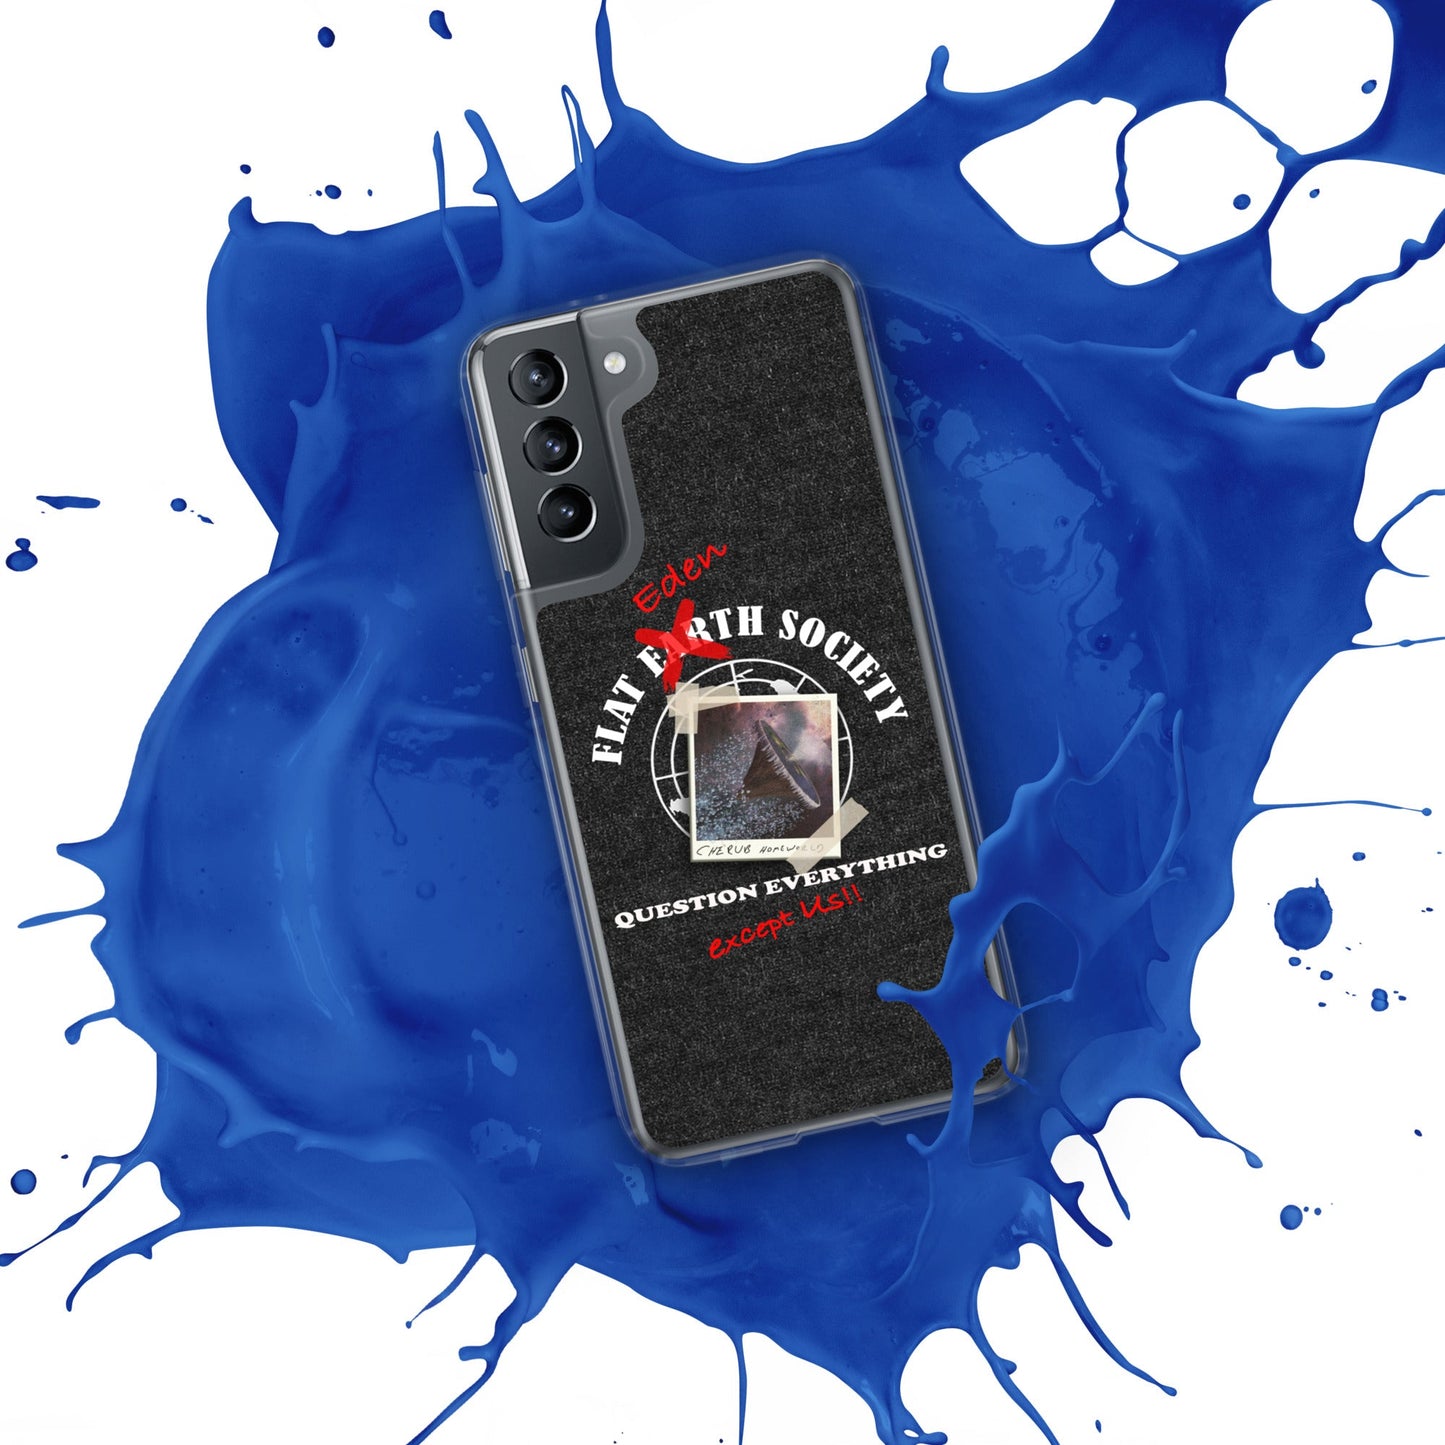 Samsung | Intergalactic Space Force 2 | Flat Eden Society - Spectral Ink Shop - Mobile Phone Cases -7213222_11349